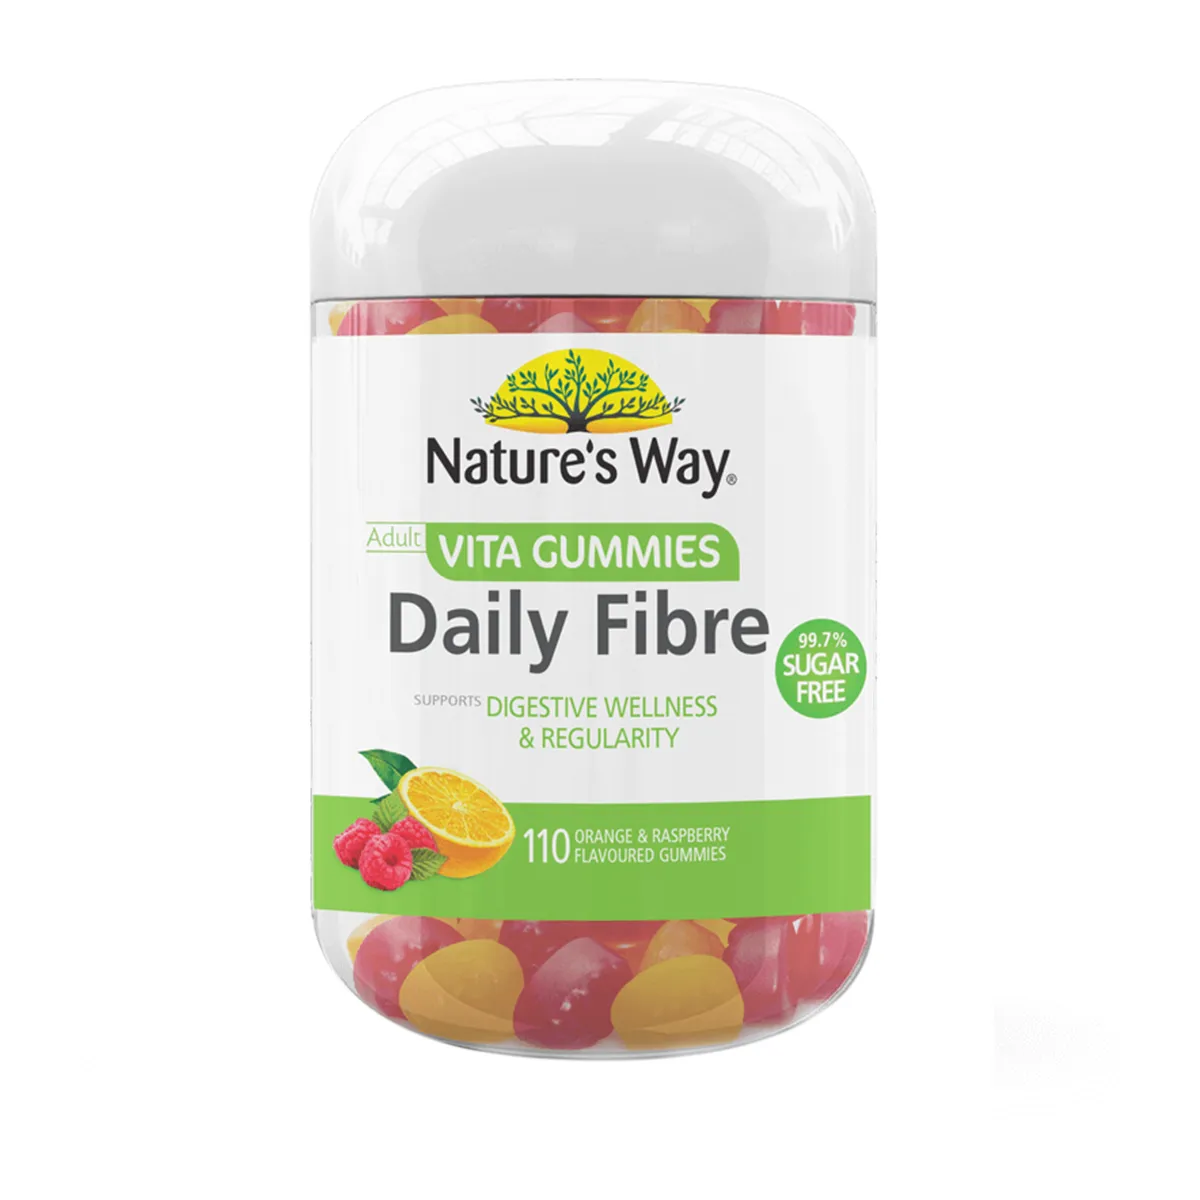 Nature’s Way Adult Daily Fibre Capsules 110s